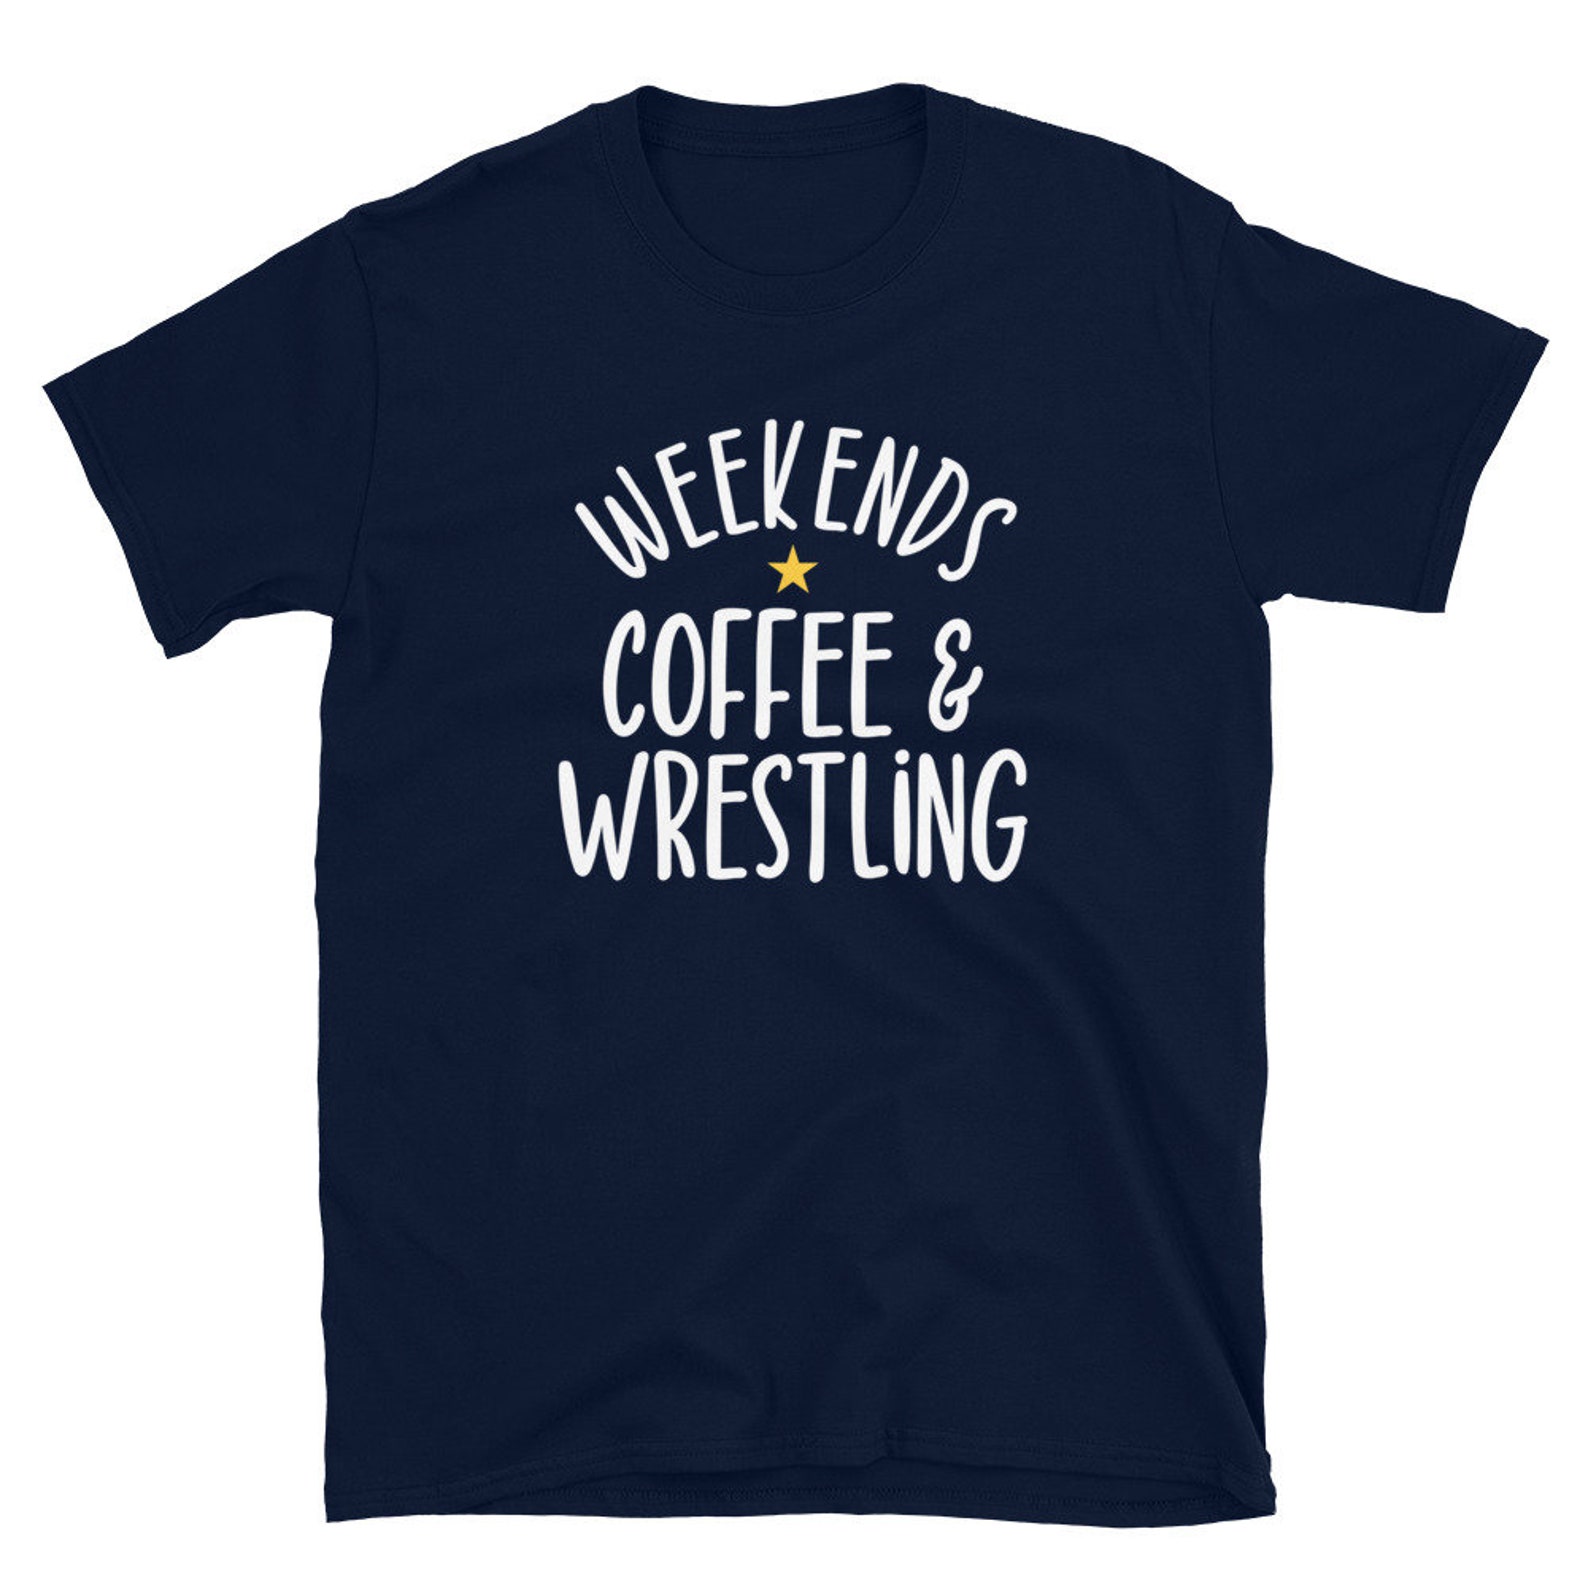 Weekends Coffee & Wrestling Shirt Funny Wrestling Gifts for - Etsy